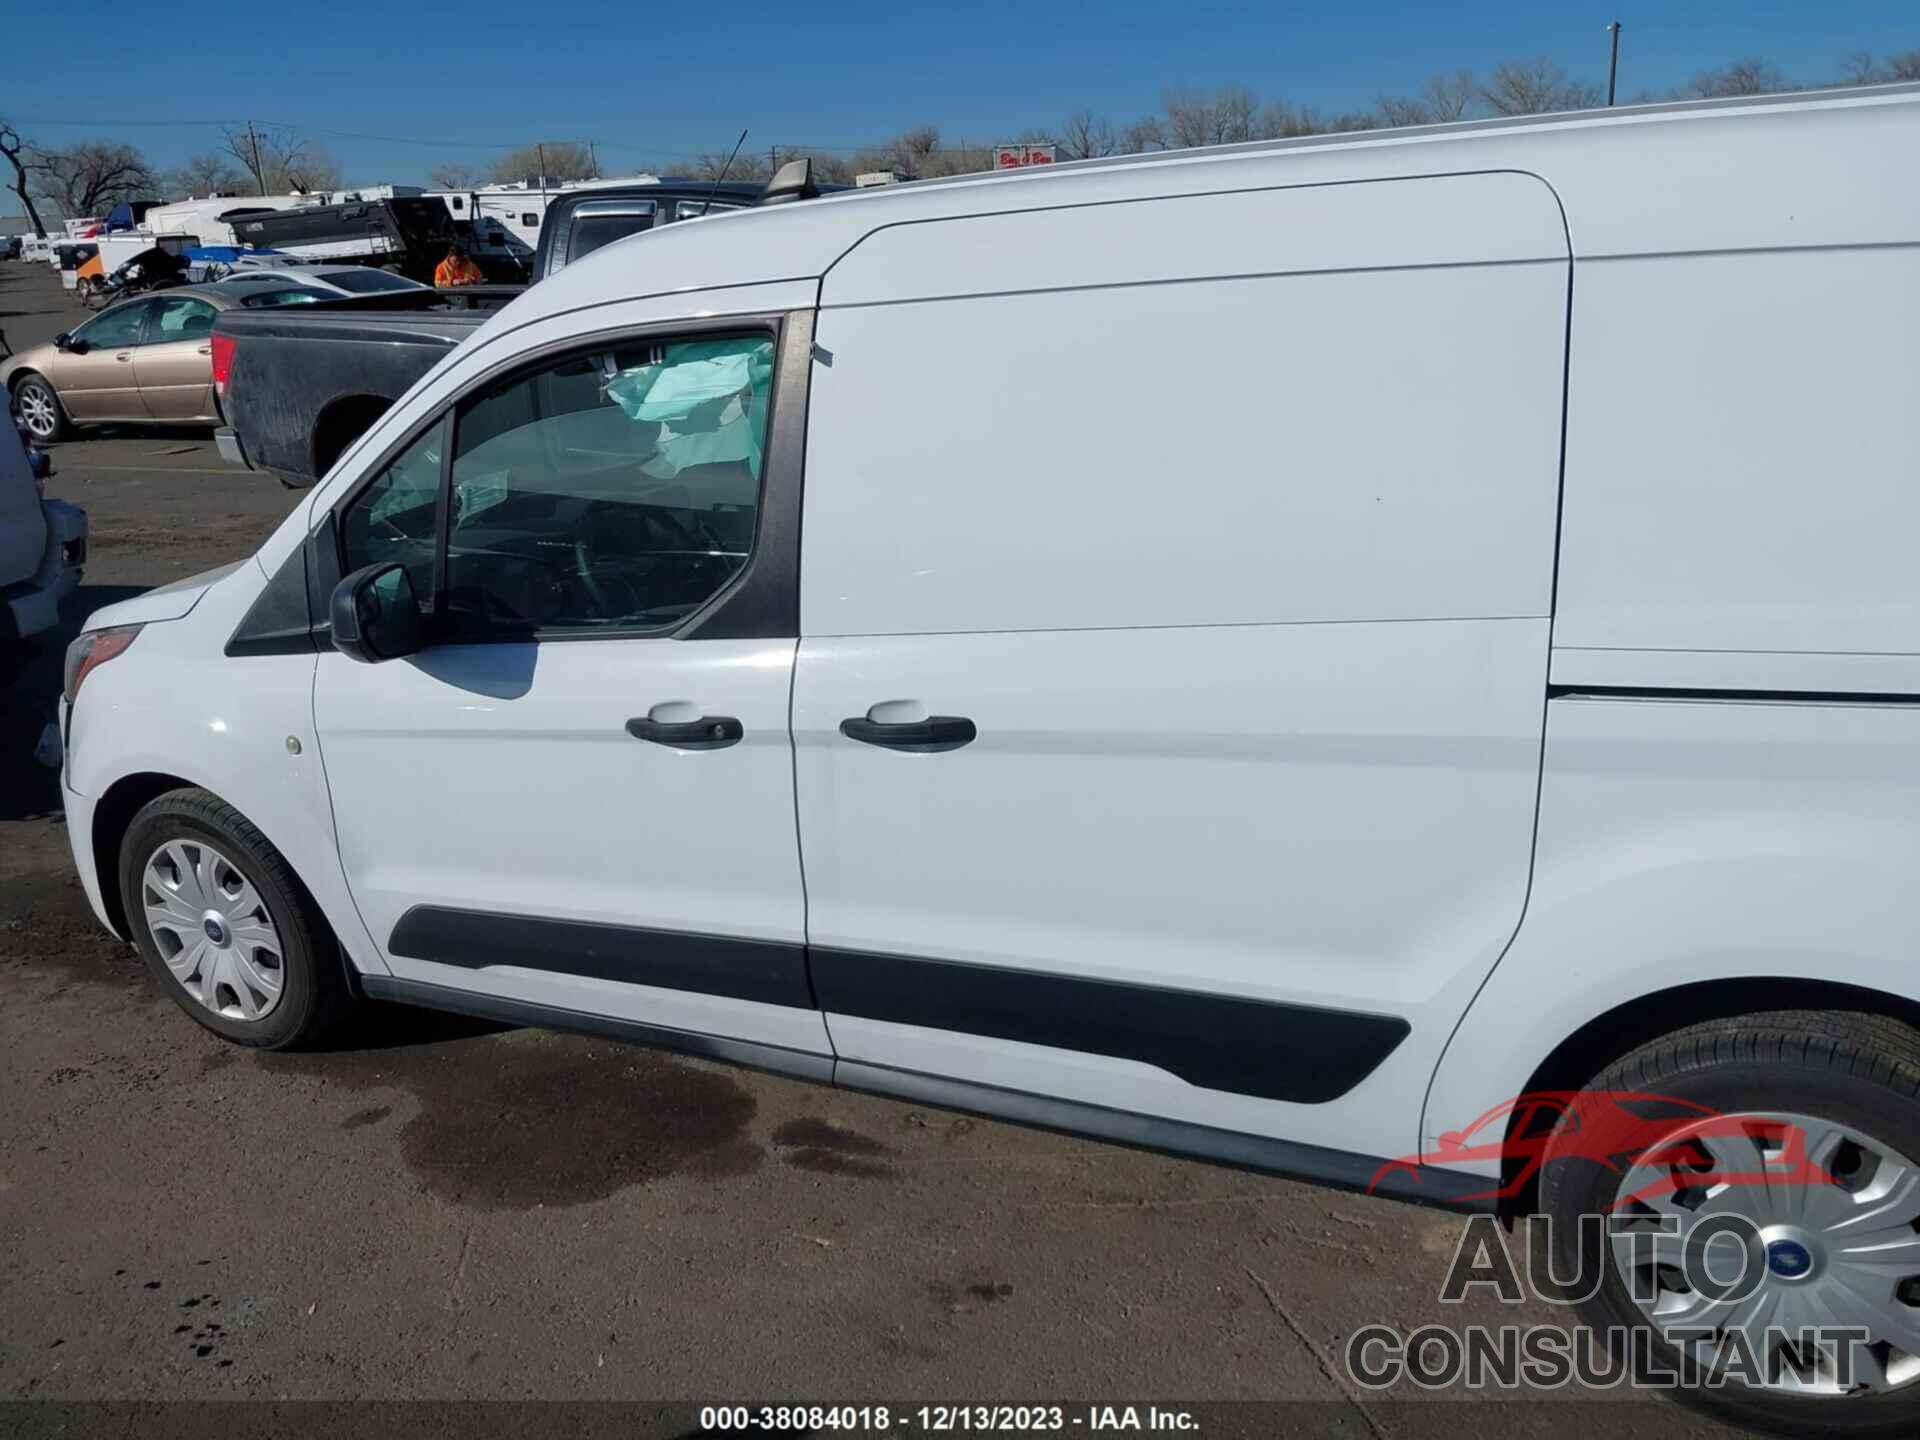 FORD TRANSIT CONNECT 2021 - NM0LS7F75M1484975